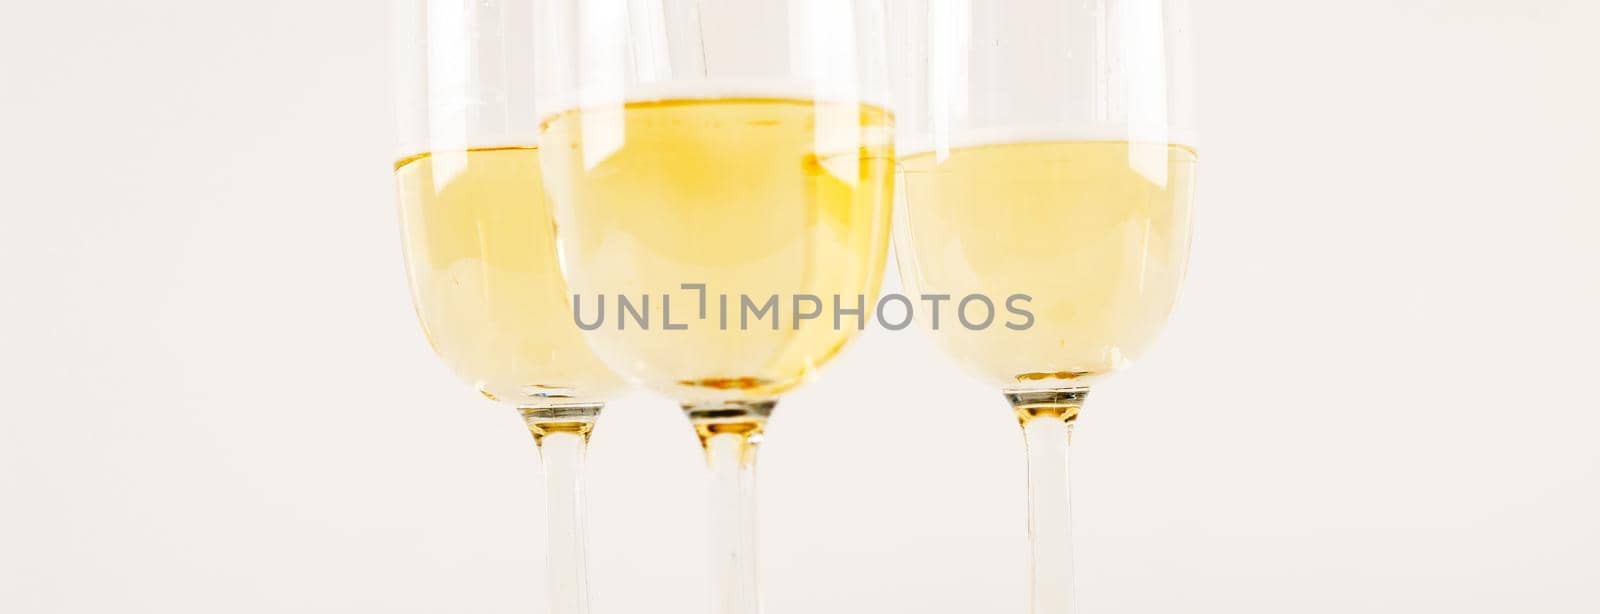 luxurious champagne in a glass, festive way of celebrating a new year or important events, toast with sparkling wine, bubbles